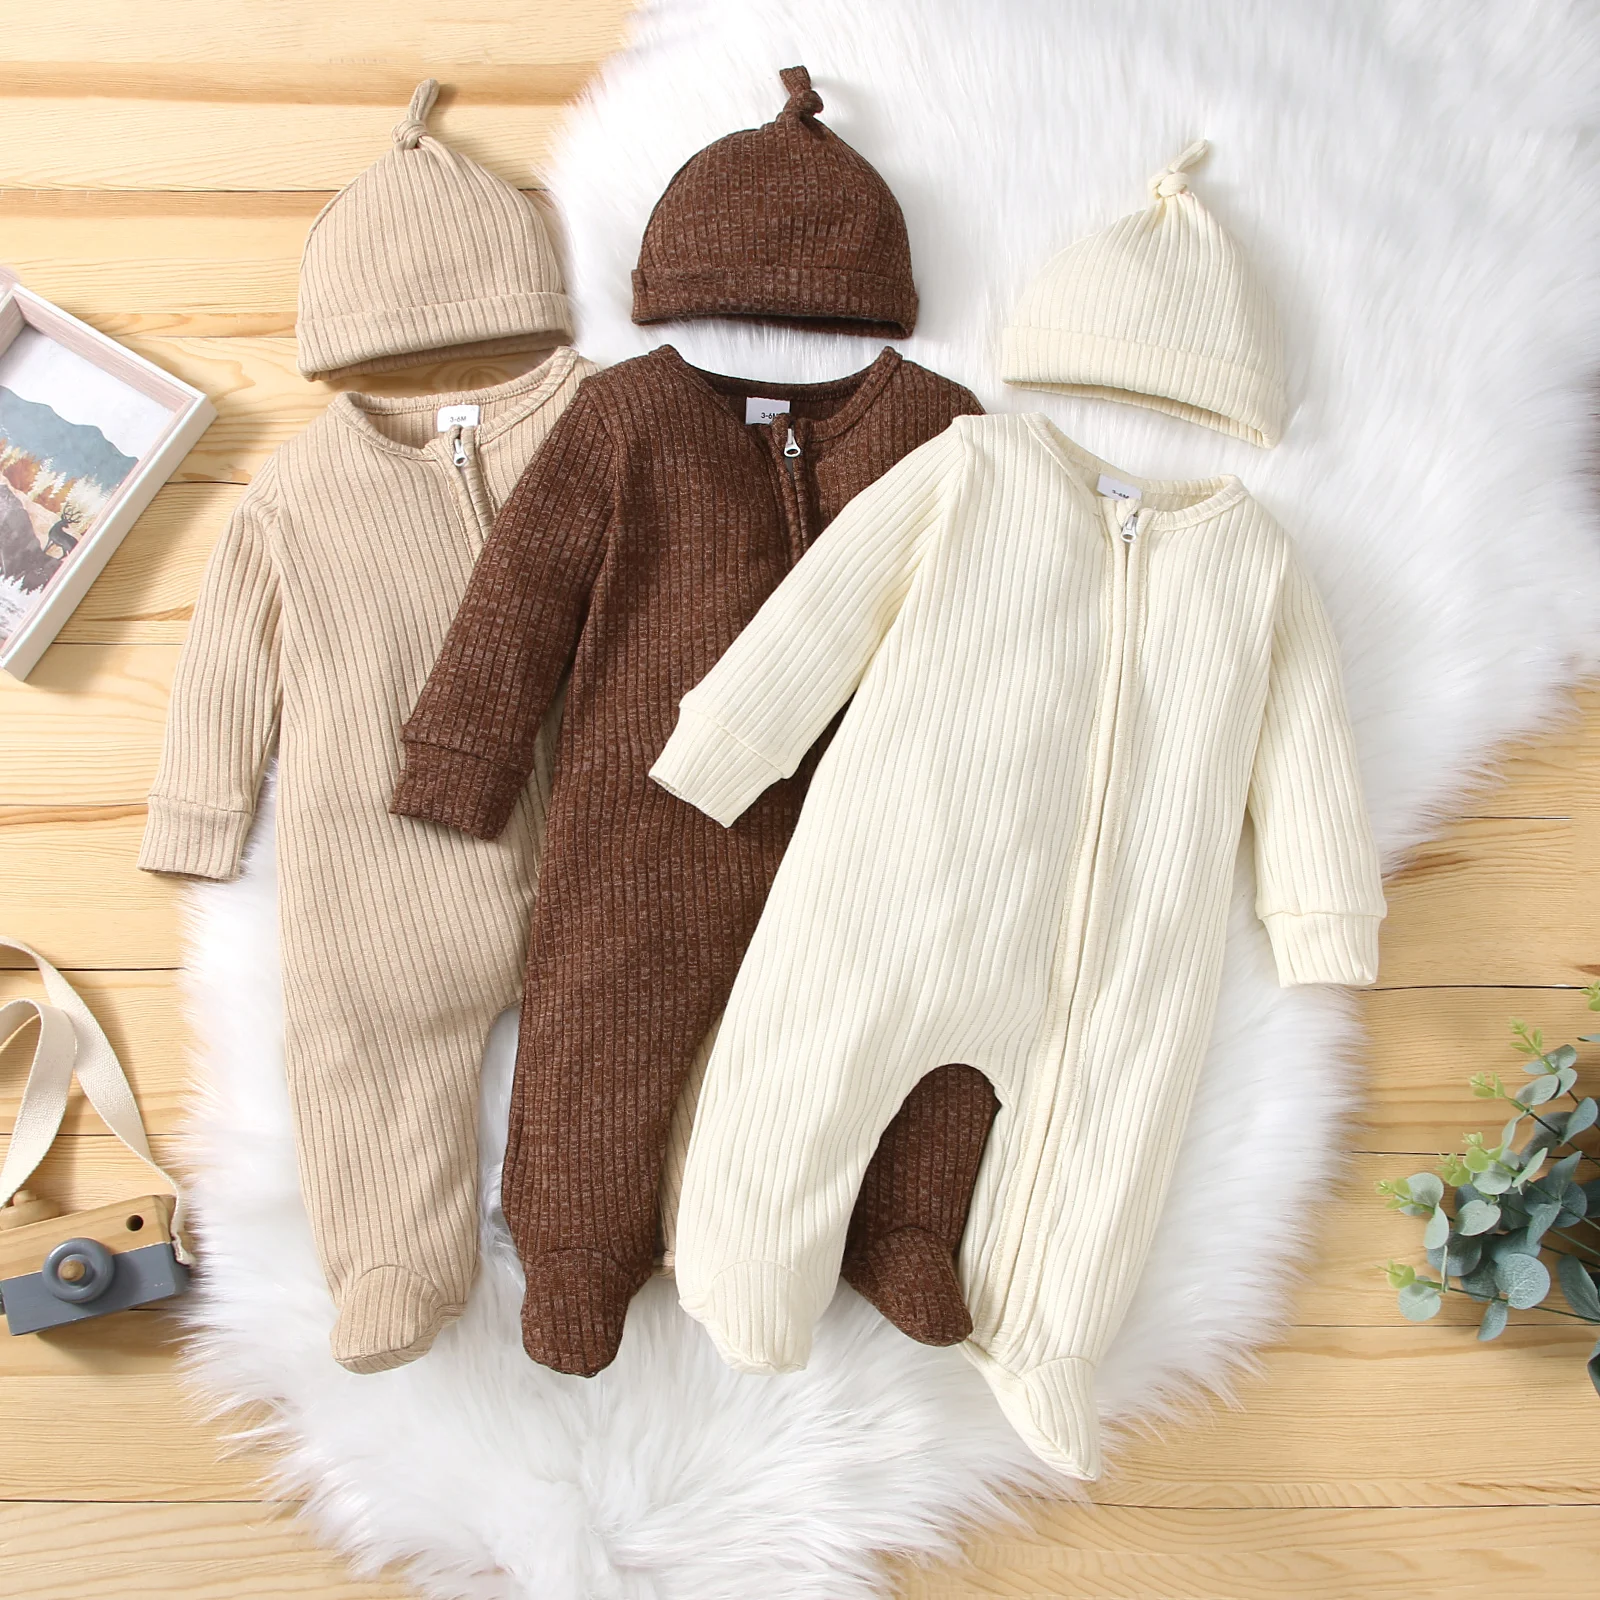 2021 0-24M Infant Baby Girl Boy Jumpsuit Autumn Casual Solid Color V Neck Zipper Long Sleeve Knitted Wrapped Romper+Hat 2pcs Cotton baby suit